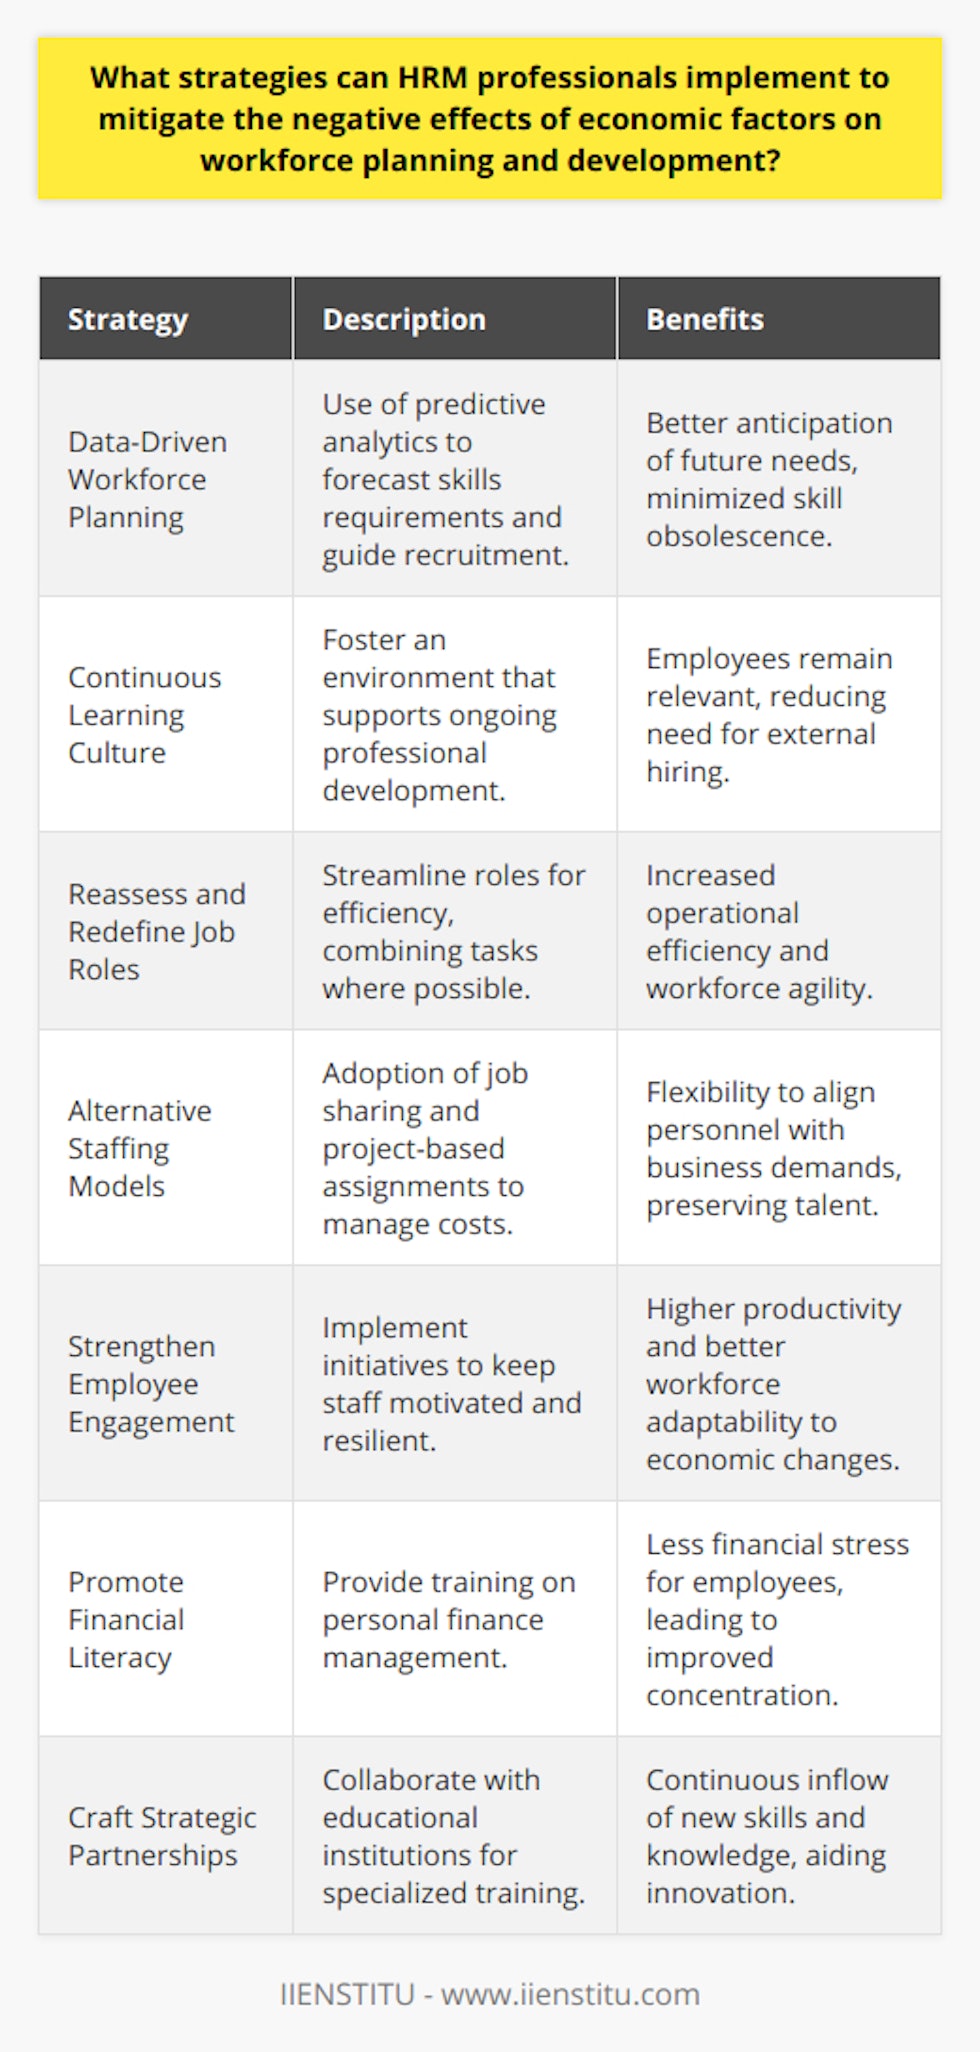 HRM professionals face the daunting task of ensuring the organization's human capital aligns with the often unpredictable economic landscape. The challenge is to retain a workforce that is both skilled and adaptable to change while also managing costs and productivity. Here are several strategic measures that can be adopted:Leverage Data-Driven Workforce PlanningHRM professionals should harness predictive analytics and other data-driven tools to anticipate workforce needs. This can involve analyzing trends within the industry, understanding demographic changes in the labor market, and forecasting future skills requirements. By knowing what skills will become obsolete and what new competencies will be needed, HRM can guide future recruitment and development programs.Implement Continuous Learning CultureA learning-oriented culture encourages continuous professional development, allowing employees to stay relevant in the face of changing economic conditions. HRM can design developmental initiatives that bridge the imminent skills gap and prepare the workforce for future roles. This long-term strategy can prevent large-scale redundancies and avoid the costs associated with hiring new talent when economic conditions improve.Reassess and Redefine Job RolesDuring economic downturns, organizations must ensure that all roles contribute to optimal operational efficiency. HRM can reassess job descriptions, combine roles where feasible, and enhance job flexibility to respond to dynamic work demands. Streamlining roles to maximize employee capacity can lead to a more agile and responsive workforce.Embrace Alternative Staffing ModelsAlternative staffing models, such as job sharing or project-based assignments, could be essential in absorbing economic shocks. These models enable HRM to align workforce capacity with business demands, thus managing labor costs effectively without compromising the talent pool.Strengthen Employee EngagementUncertain economic climates can affect employee morale. HRM should, therefore, bolster initiatives that engage and motivate employees – recognized staffs are more likely to exhibit resilience and adaptability during tough times. Engagement strategies might include transparent communication, recognizing individual contributions, and ensuring a voice for employees in workplace decisions.Promote Financial LiteracyOne innovative strategy that is often overlooked is promoting financial literacy within the workforce. Through workshops and training sessions on personal finance management, employees gain the confidence to manage their finances better, which can reduce stress and enhance focus at work.Craft Strategic PartnershipsFinally, HRM professionals can forge partnerships with educational institutions like IIENSTITU to provide employees with access to specialized training and new learning opportunities. These partnerships ensure a steady flow of new skills and knowledge into the organization, which can be vital for innovation and growth during changing economic conditions.In essence, by being proactive and versatile, HR professionals can significantly alleviate the potential adverse effects of economic factors on workforce planning and development. The strategies outlined emphasize foresight, agility, and a strong relationship with employees, which together can help steer organizations through economic uncertainty.